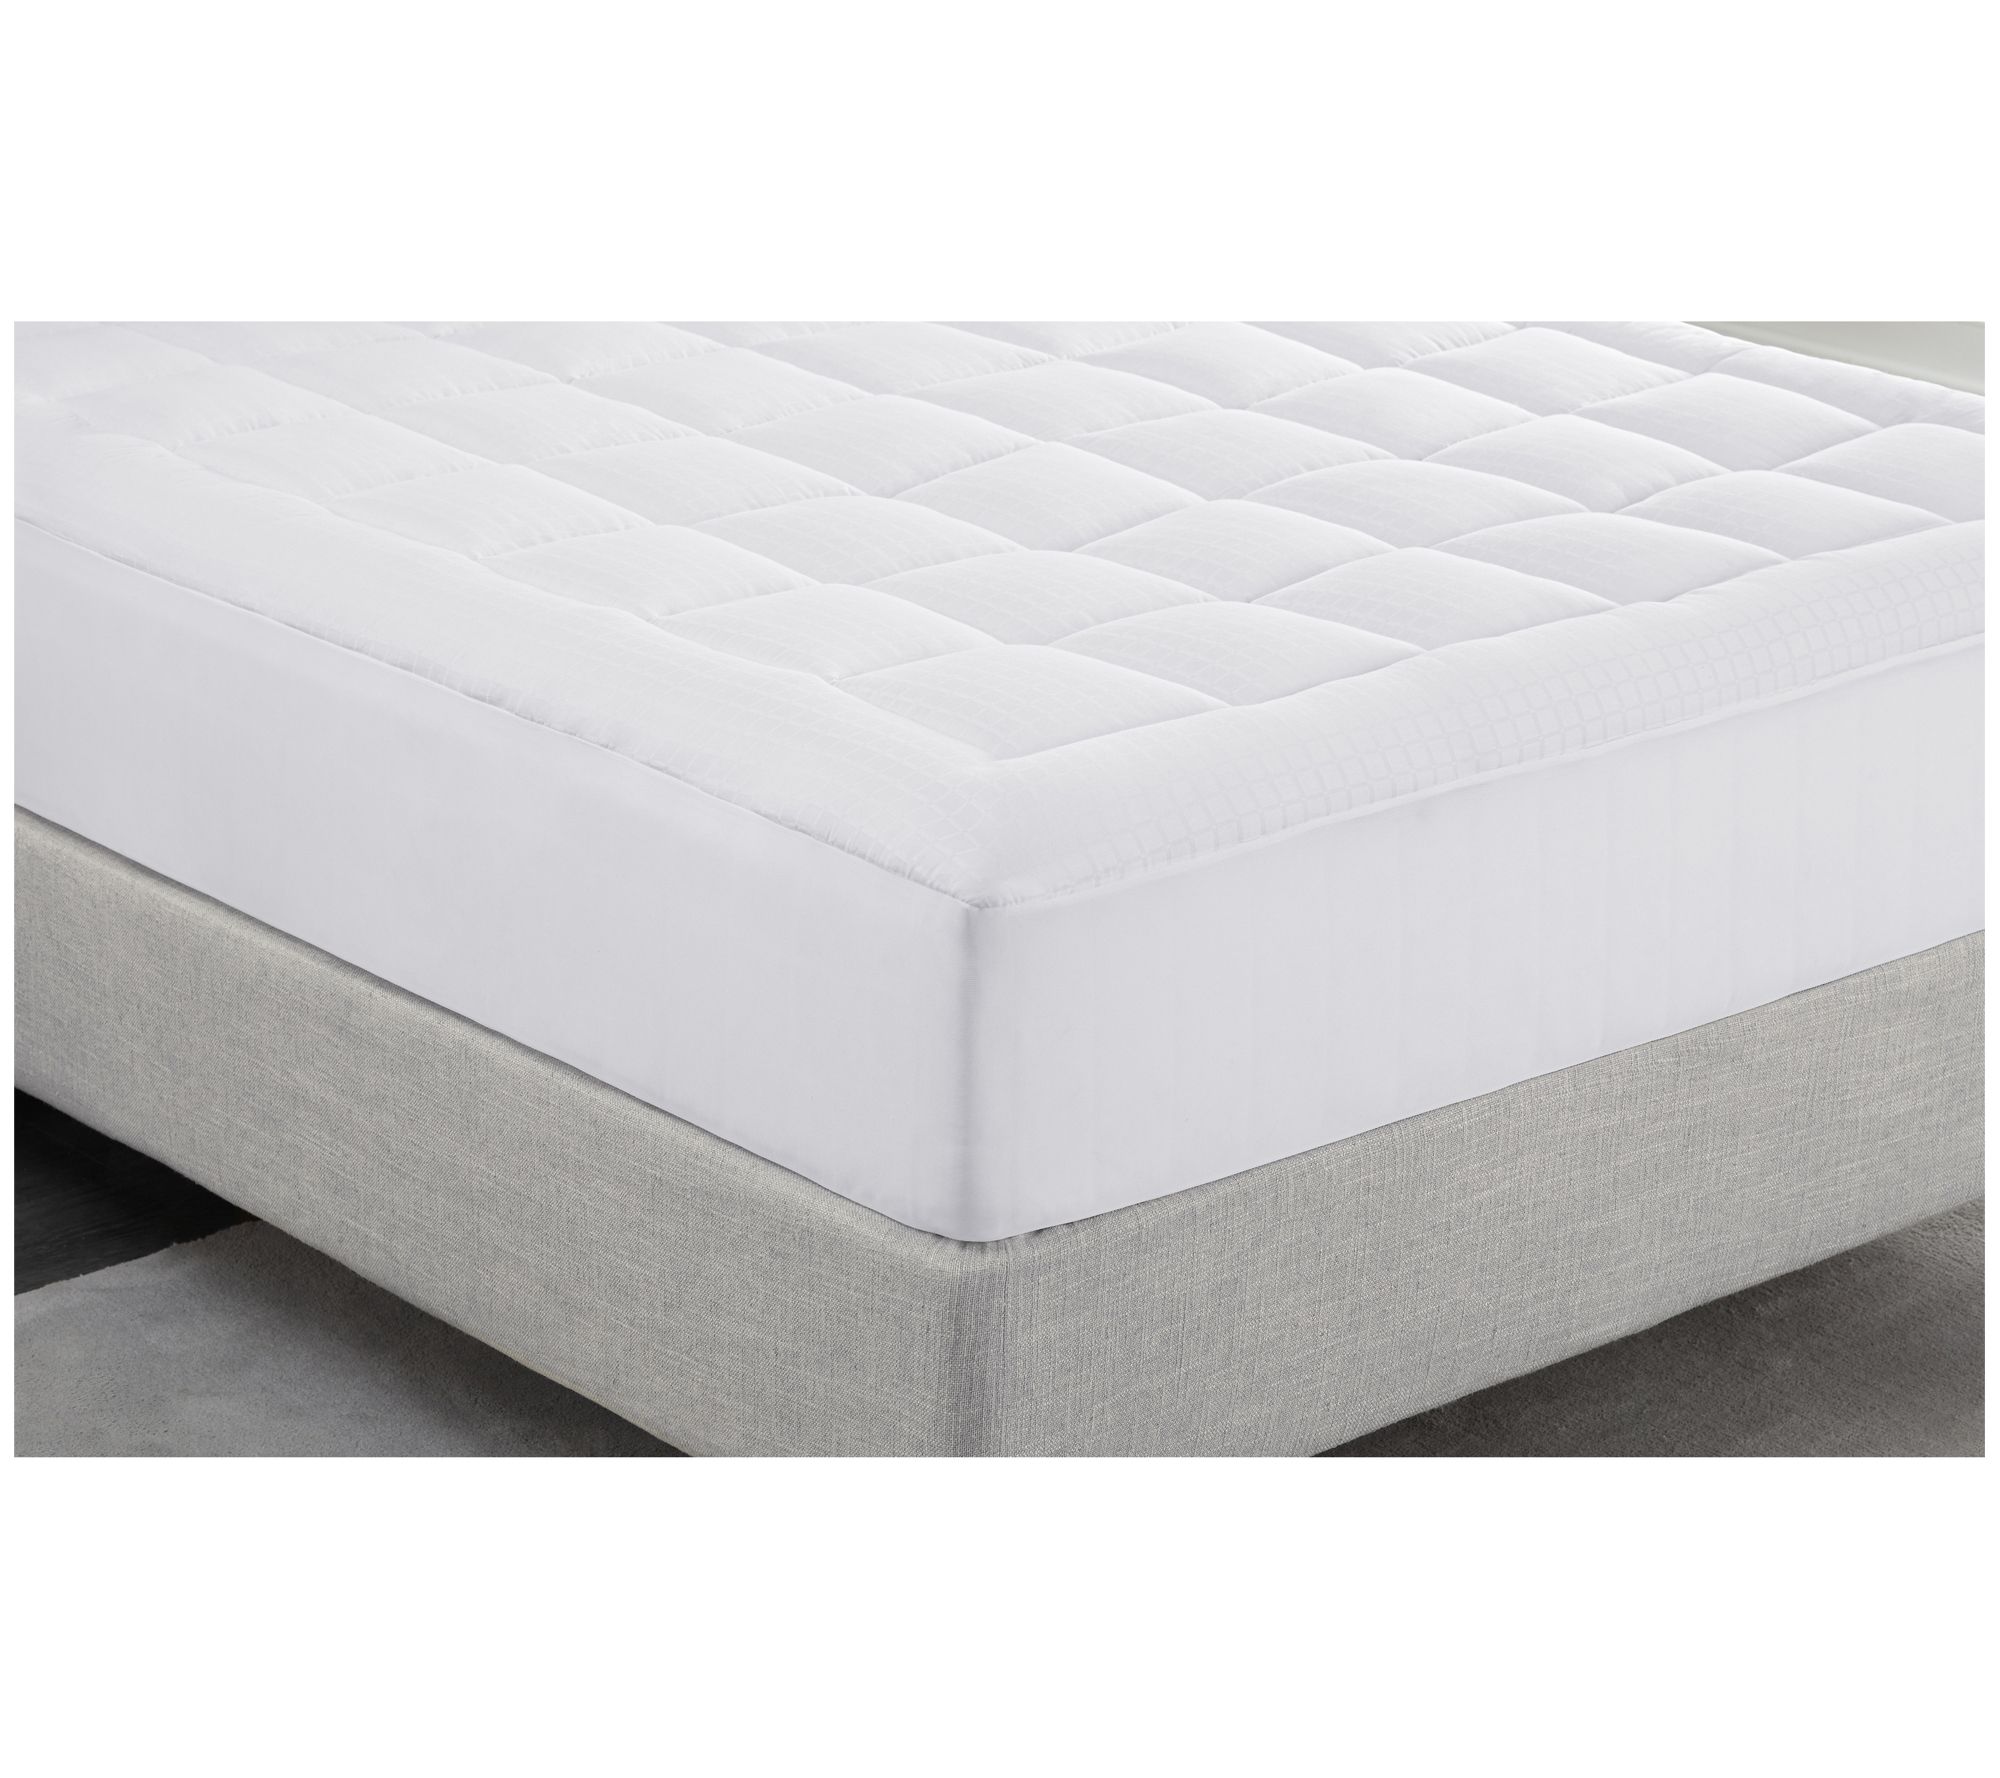 Serta Comfort Sure Deluxe Quilted Top Mattress Cover Twin XL - QVC.com